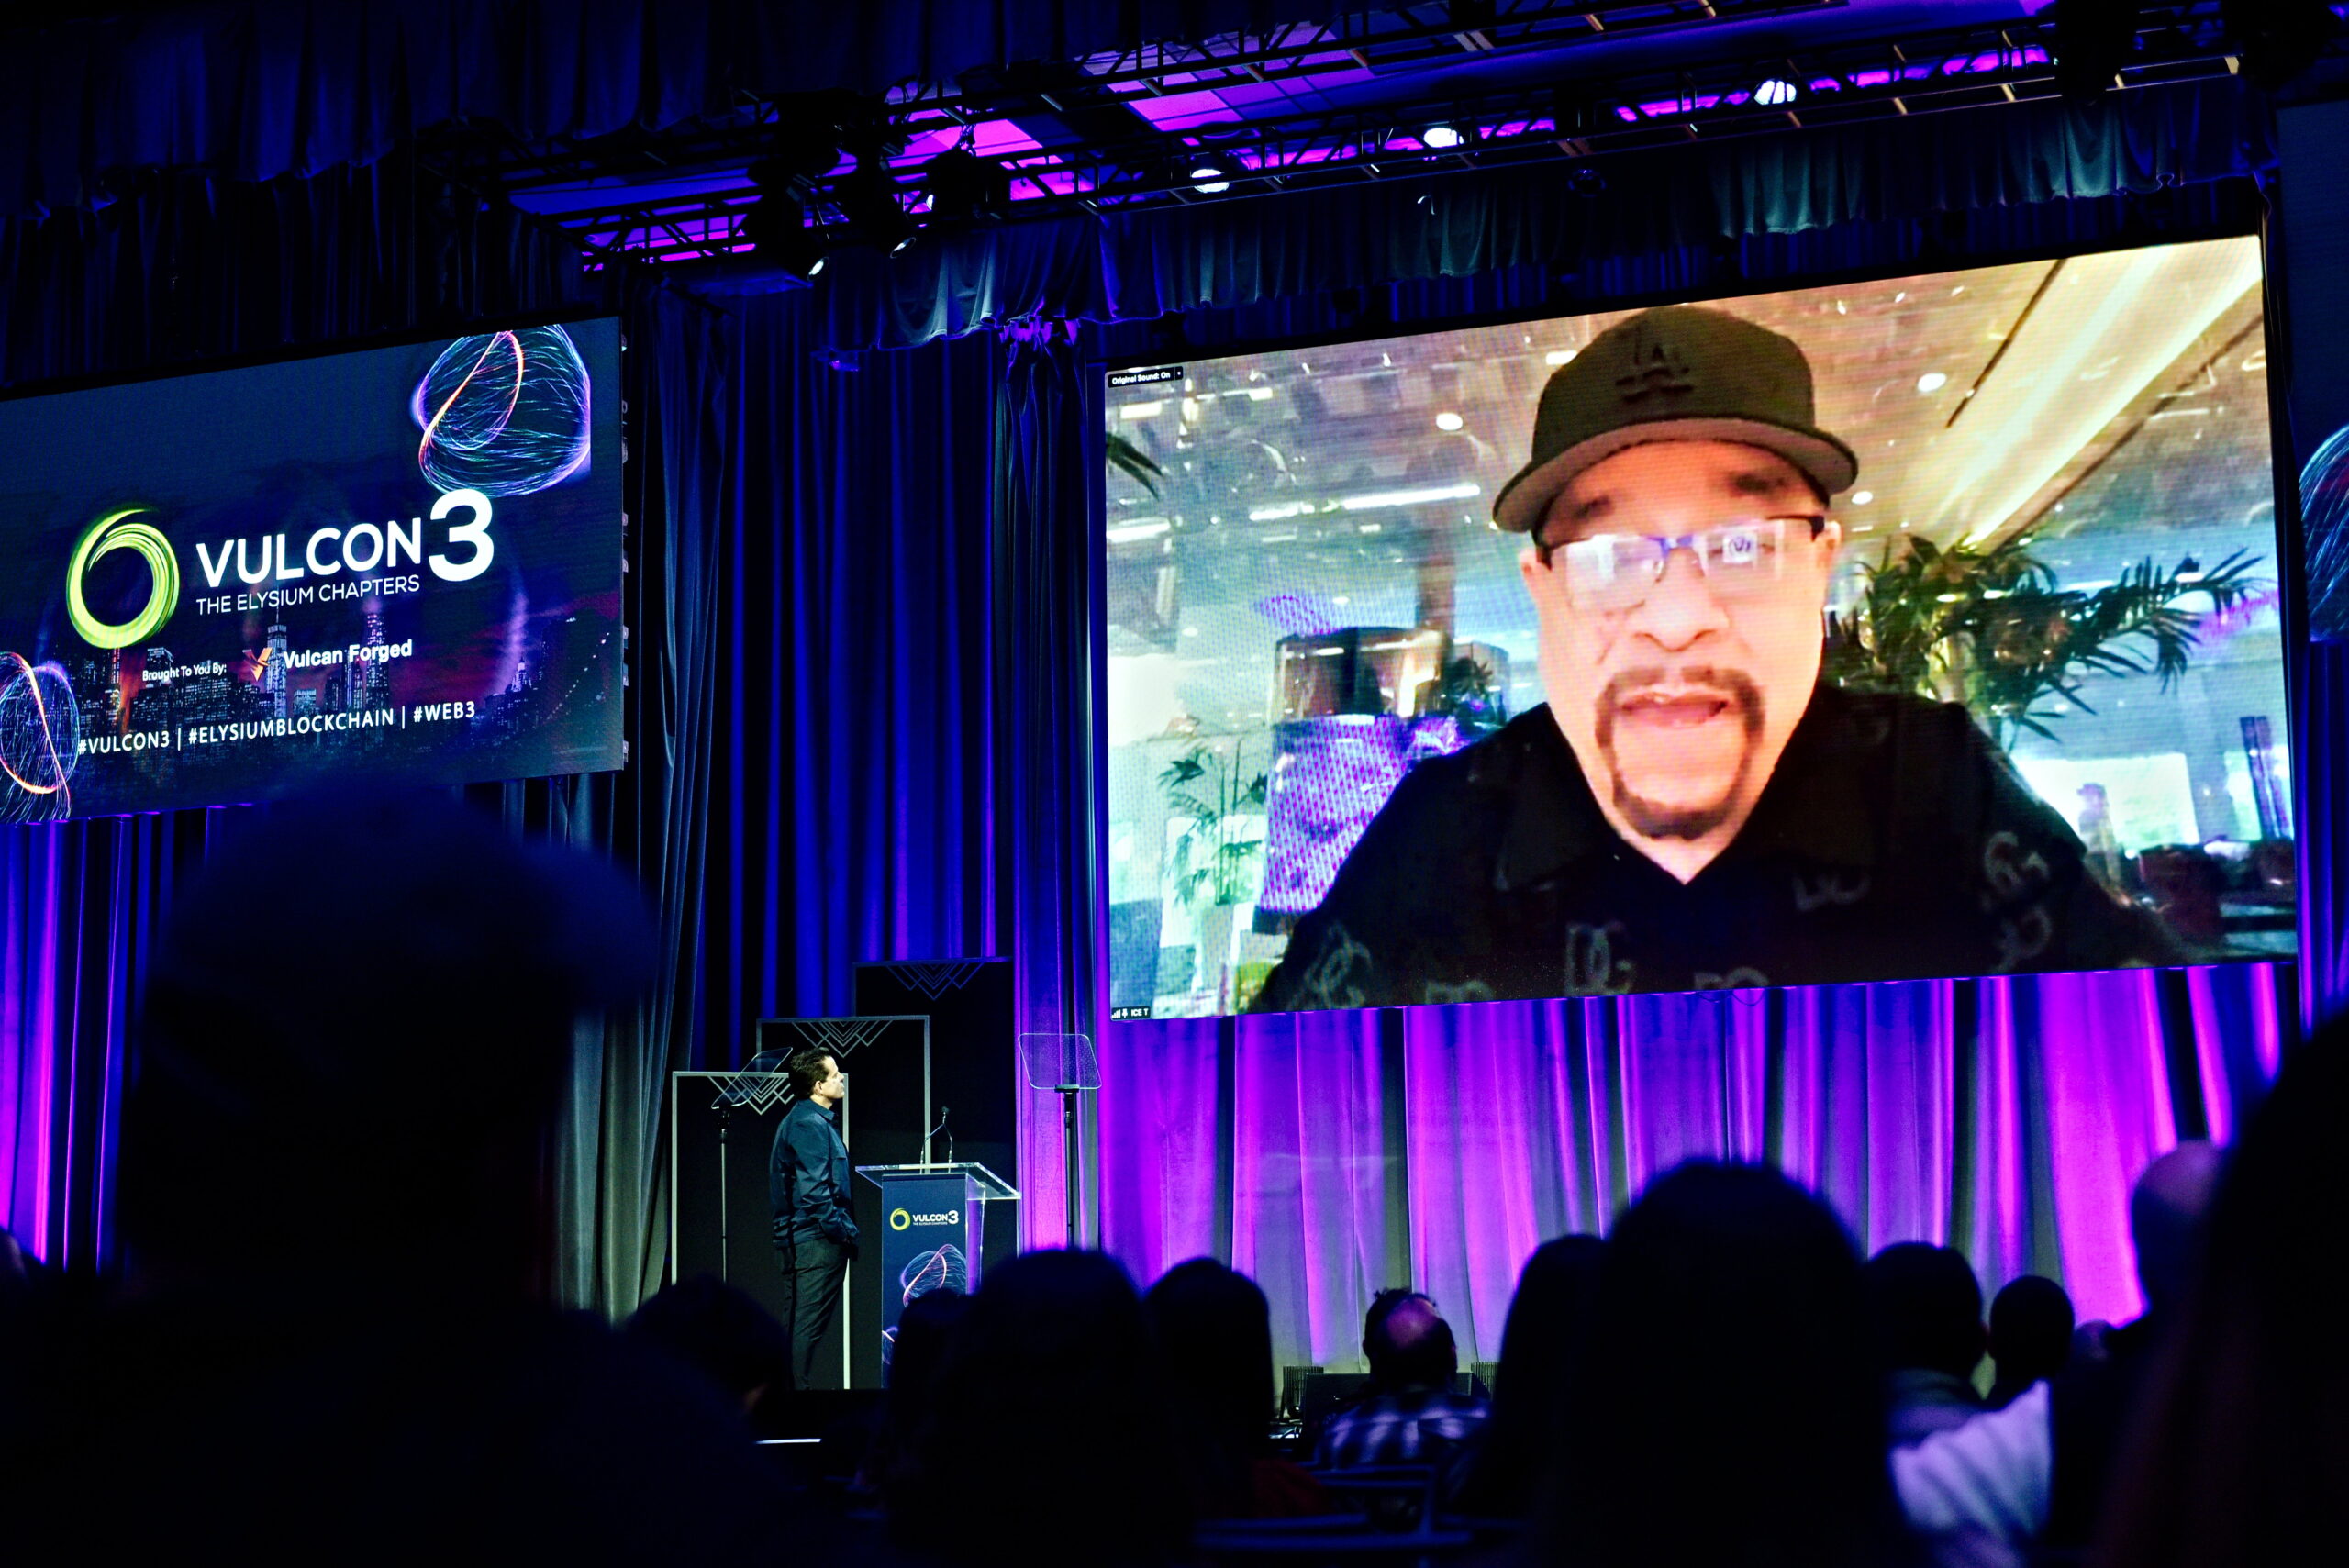 Ice-T on screen at Vulcan Forged's VulCon3 talking to Anthony Scaramucci at Ziegfeld Ballroom, New York City, May 2023.